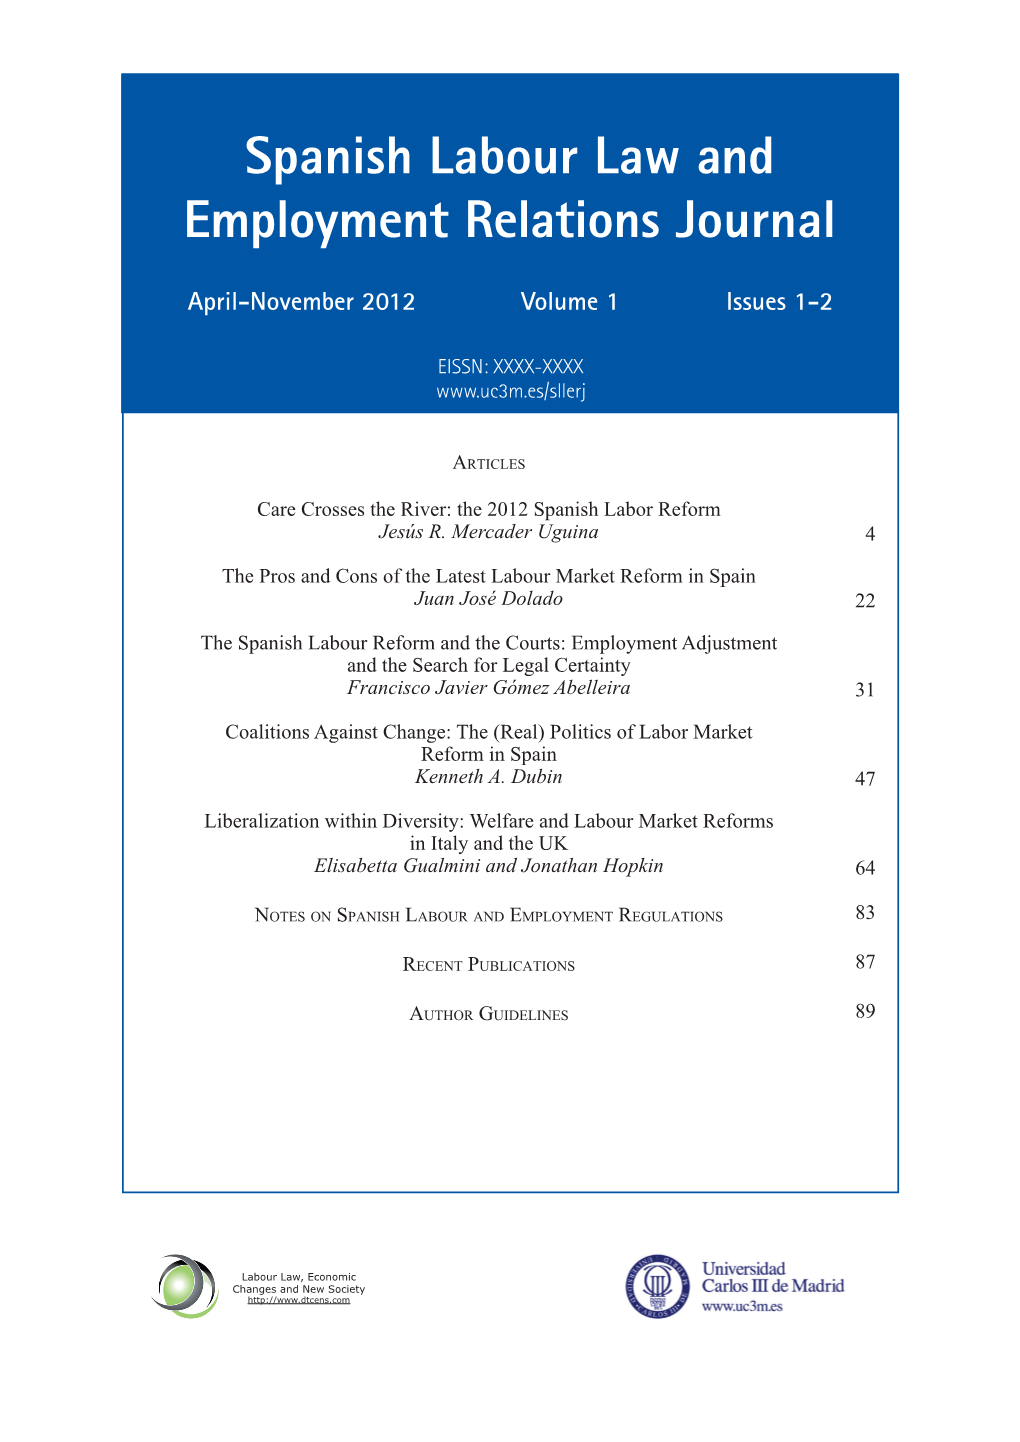 Spanish Labour Law and Employment Relations Journal